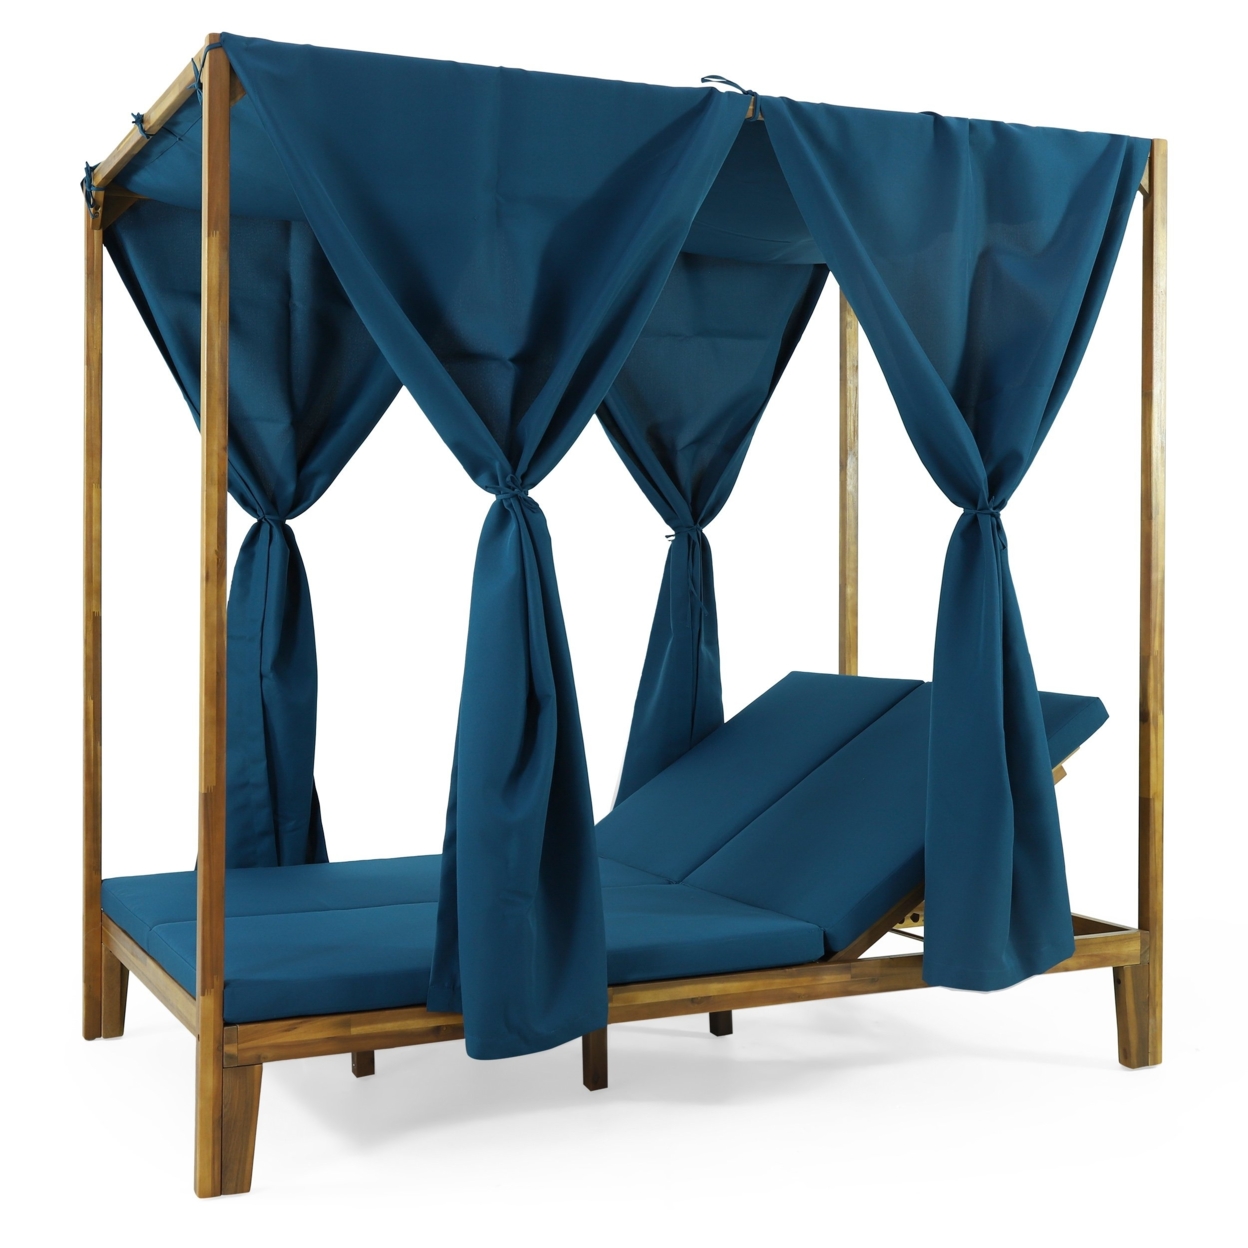 Leaverton Outdoor 2 Seater Adjustable Acacia Wood Daybed With Curtains - Teak Finish/blue